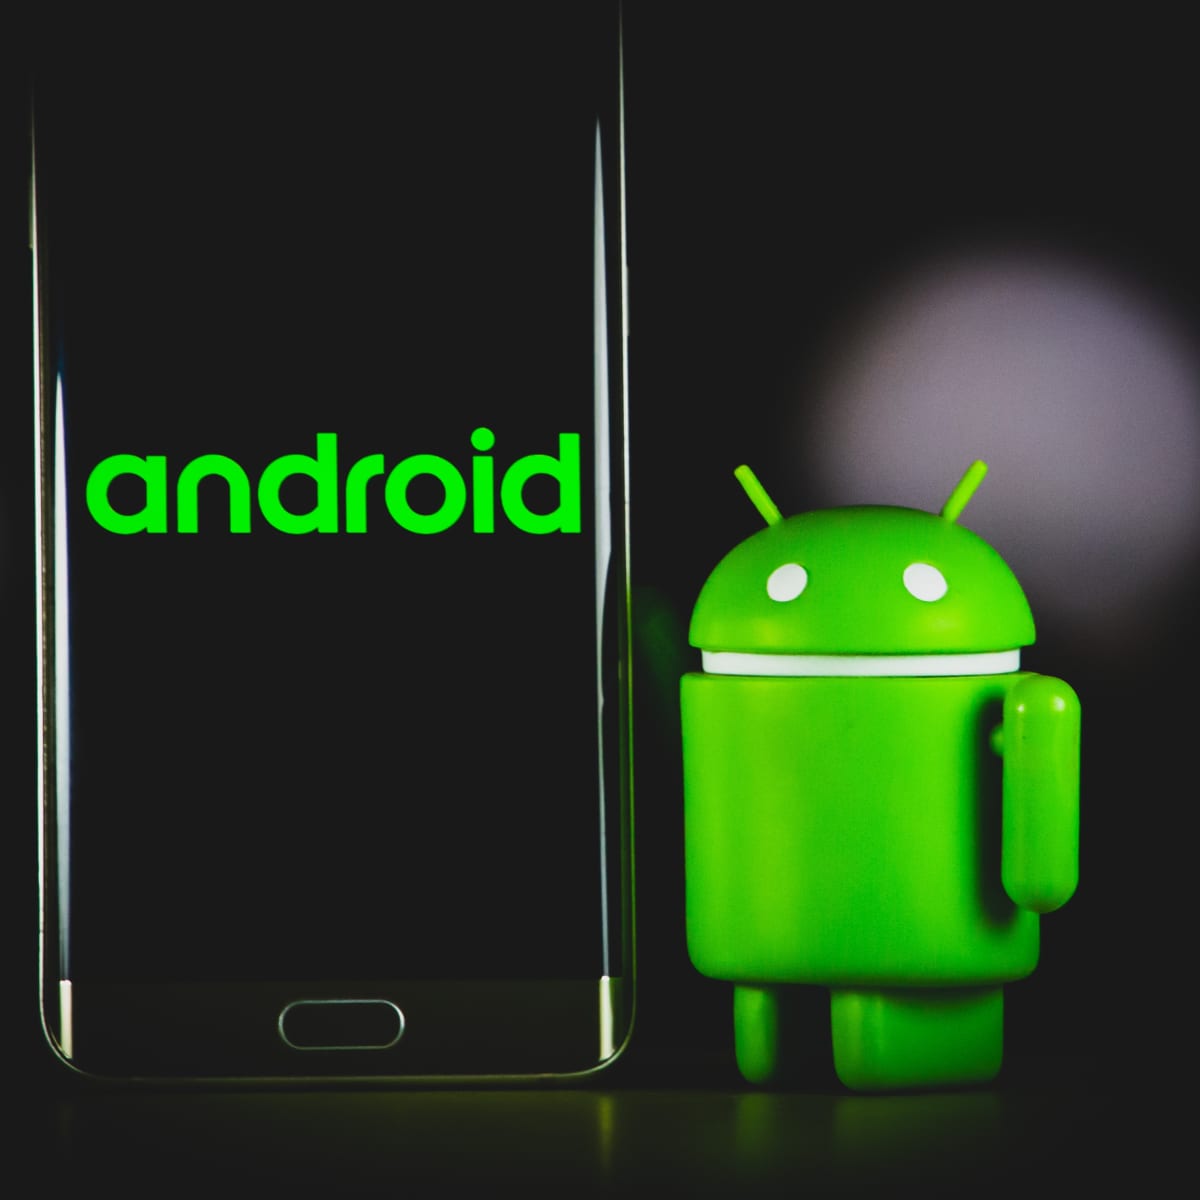 The utility and significance of Android Modded games